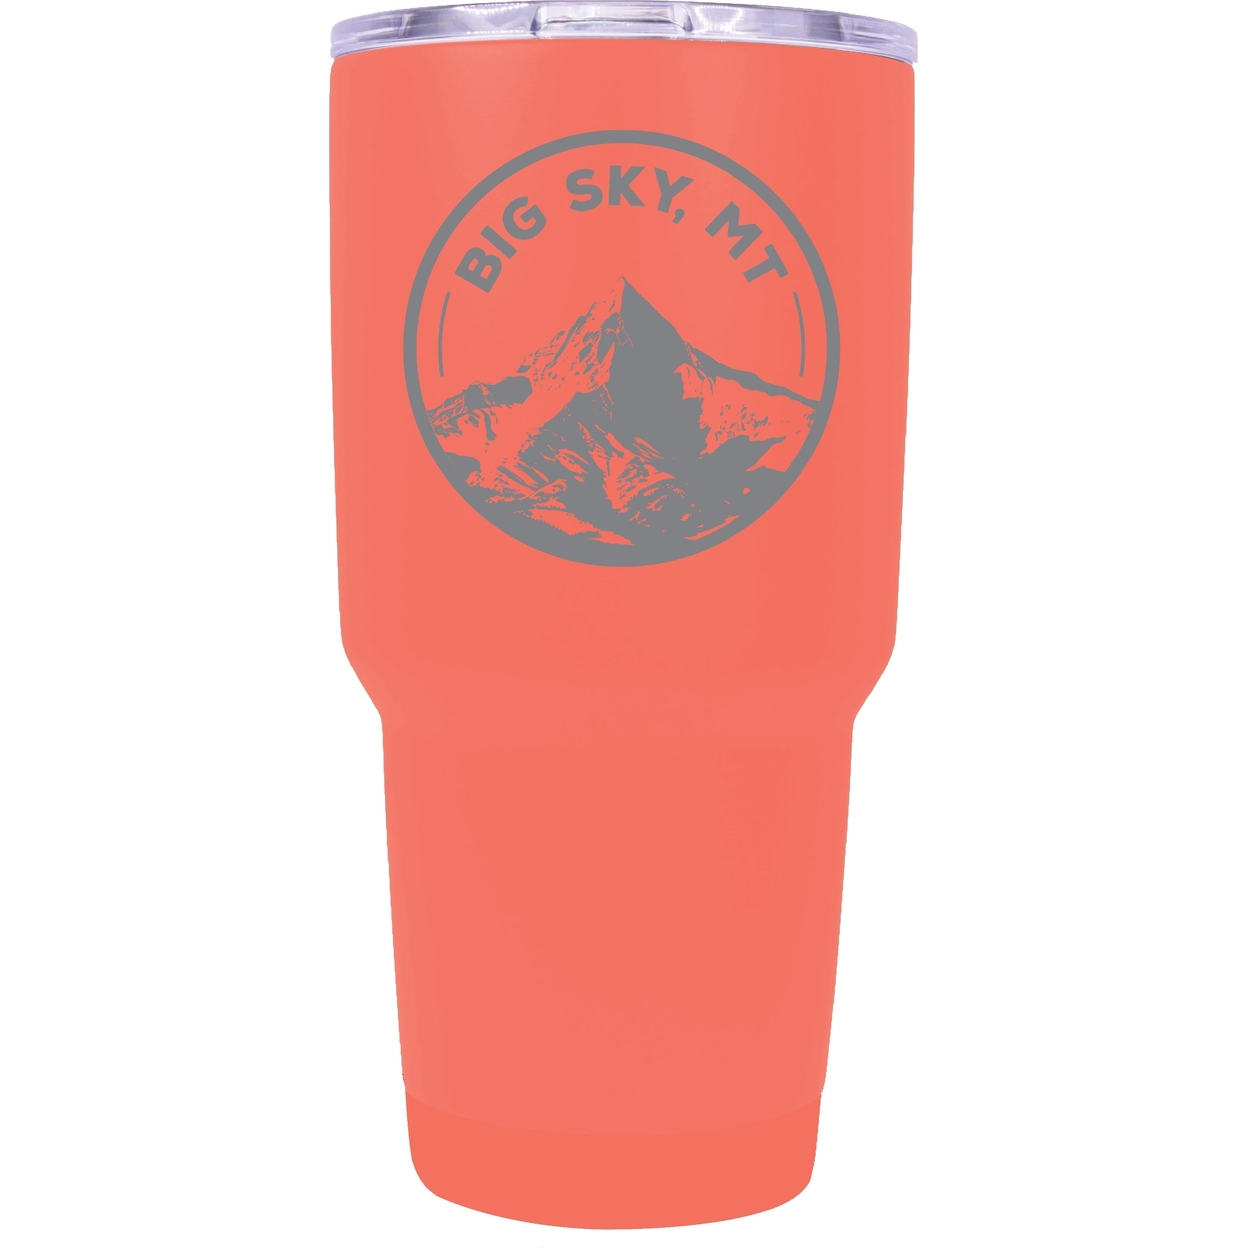 Big Sky Montana Souvenir 24 Oz Engraved Insulated Stainless Steel Tumbler - Coral,,2-Pack